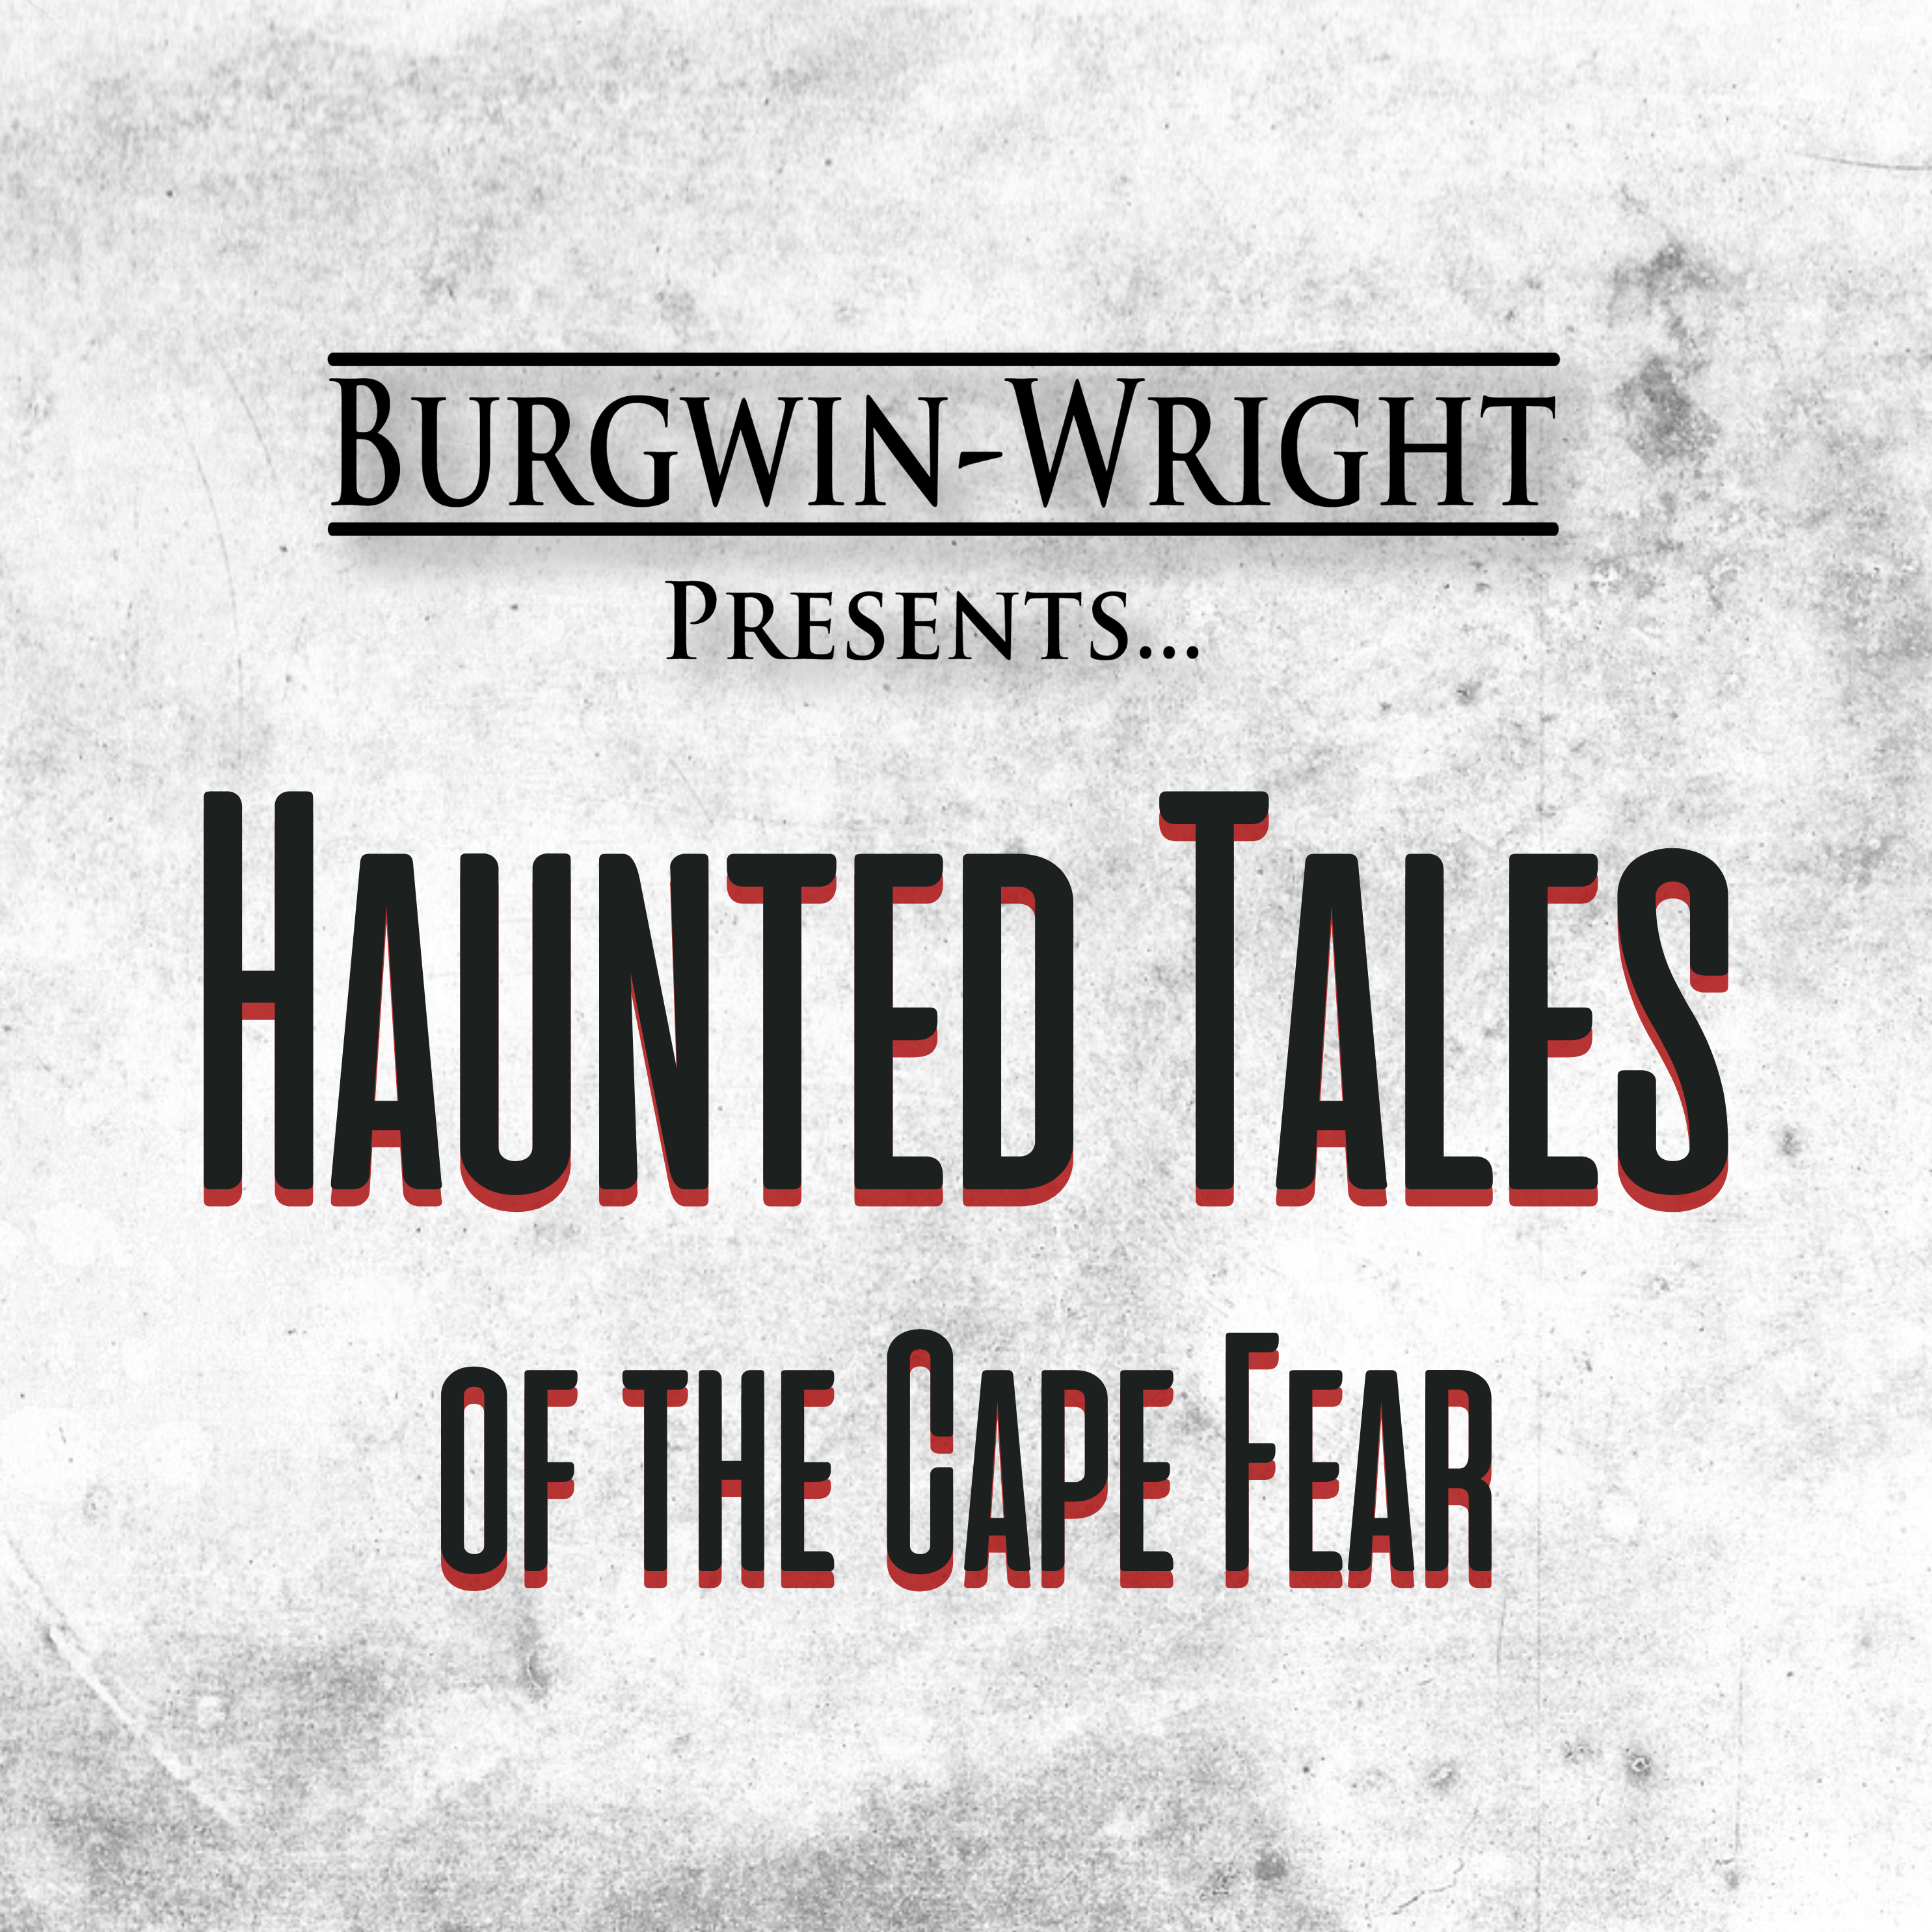 Haunted Tales of the Cape Fear: Wilmington Railroad Museum